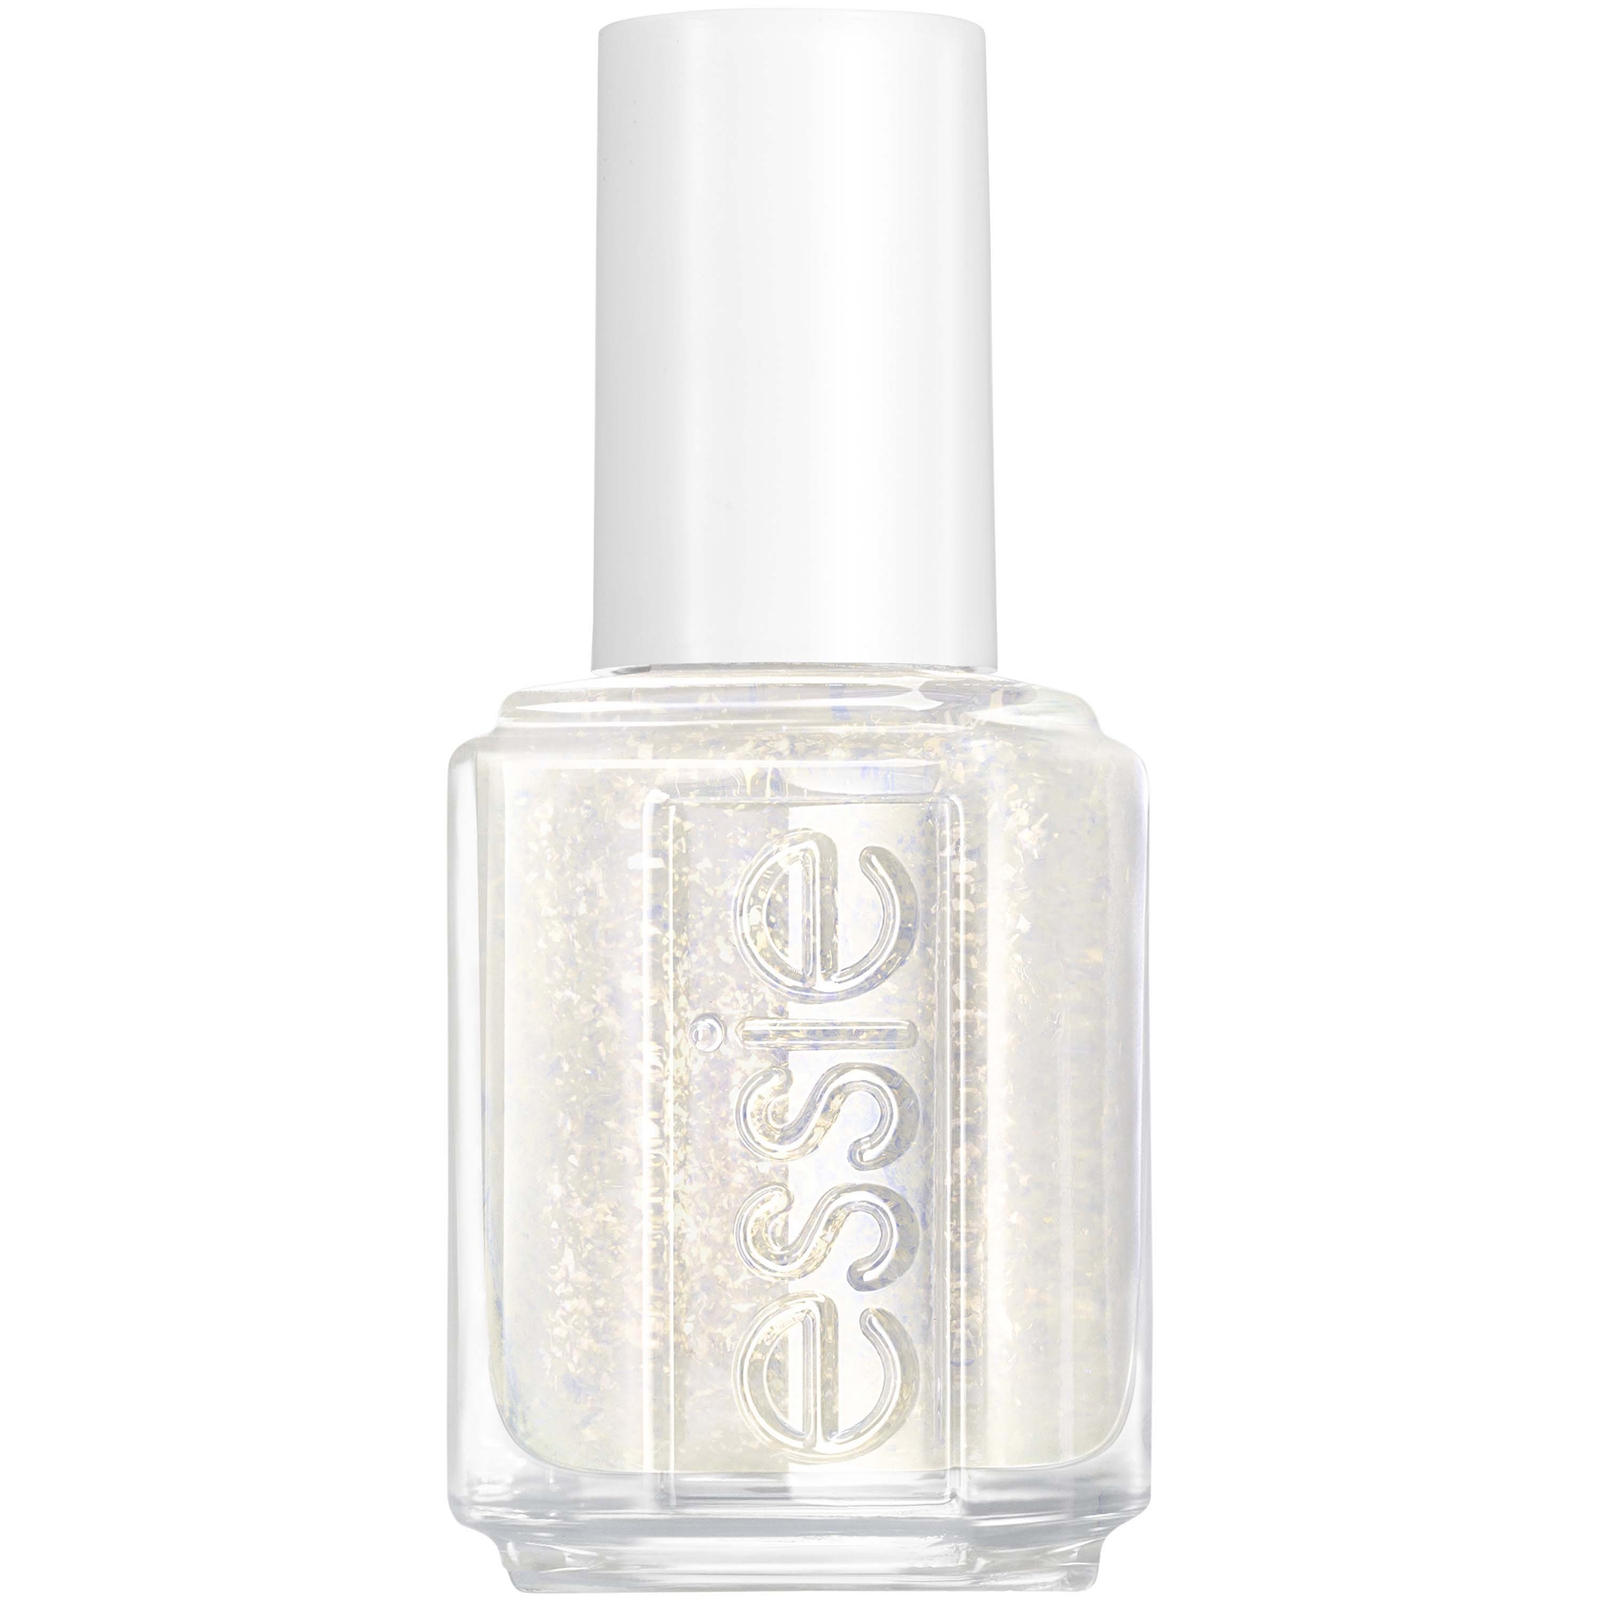 Essie Original Nail Art Studio Special Effects Nail Polish Topcoat 13.5ml (various Shades) - Seperated Sta In Seperated Starlight